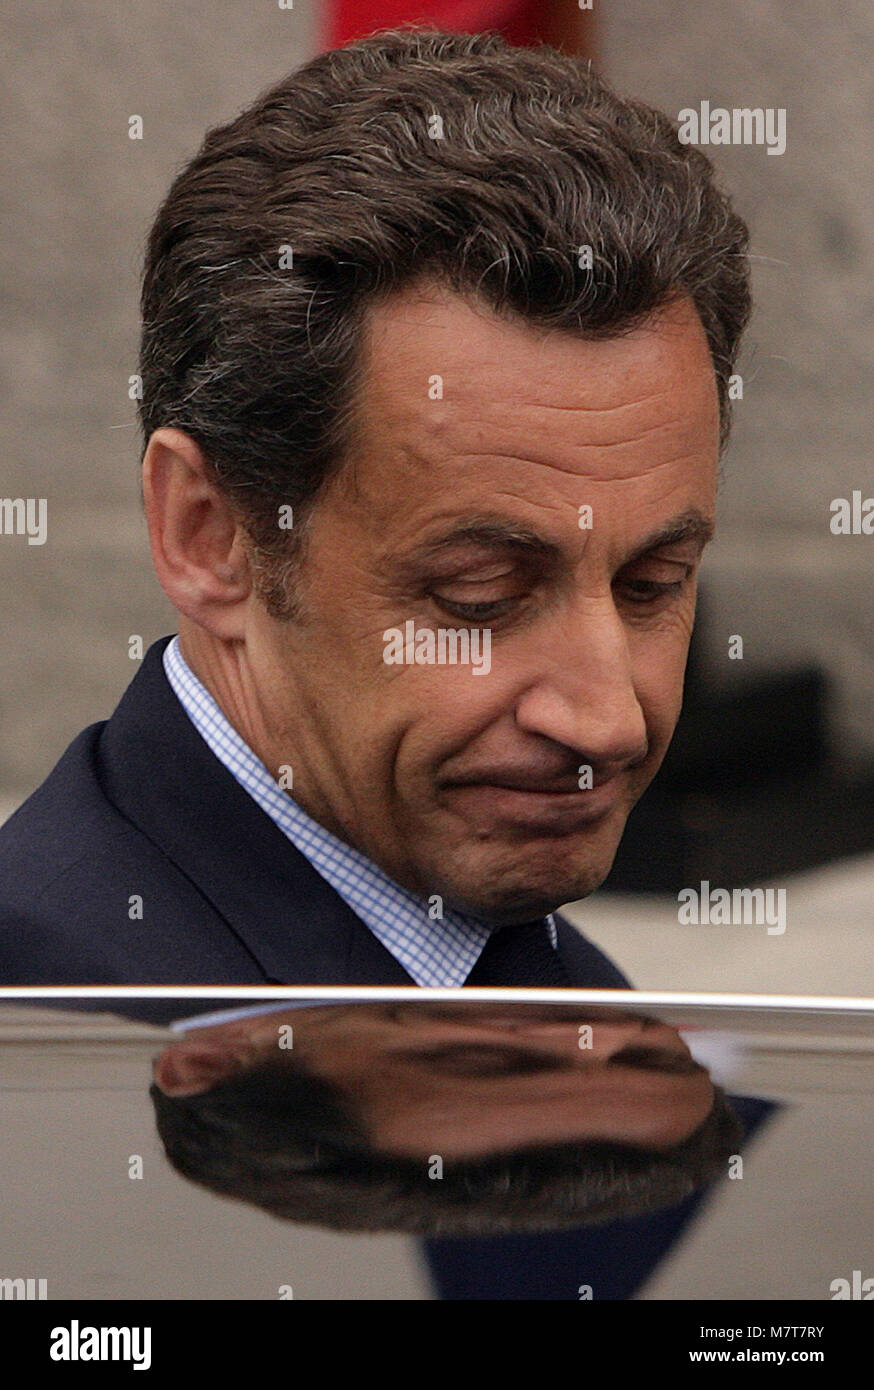 French President Nicolas Sarkozy gets into his car after holding a day long meeting with Taoiseach Brian Cowen at Government Buildings in Dublin, Monday 21, July 2008. Sarkozy met the two main opposition leaders - Fine Gael's Enda Kenny and Labour's Eamon Gilmore and talks with groups who opposed and supported the Lisbon Treaty. Photo/Paul McErlane Stock Photo